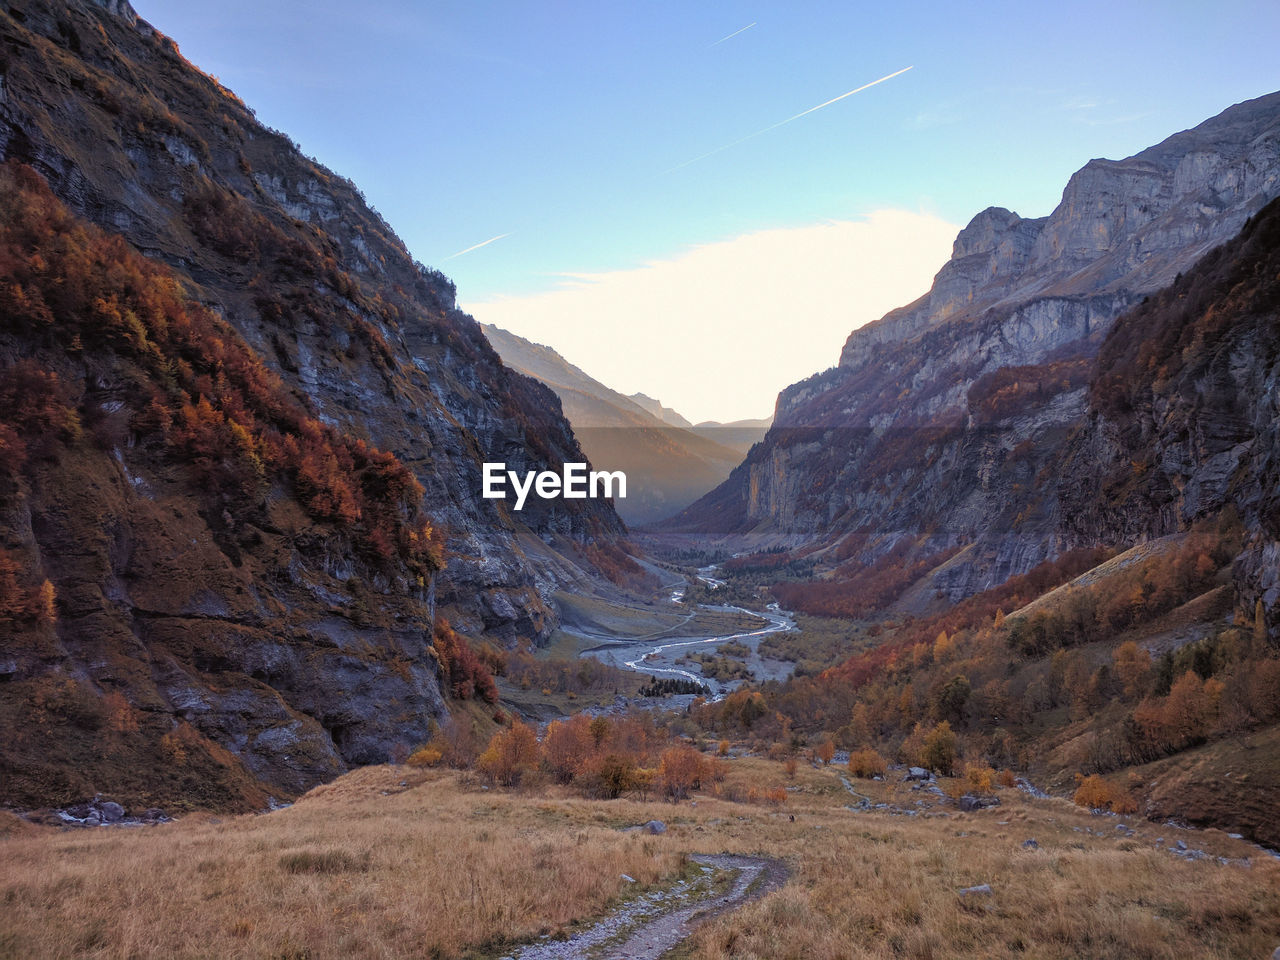 Ree image of canyon ravine valley